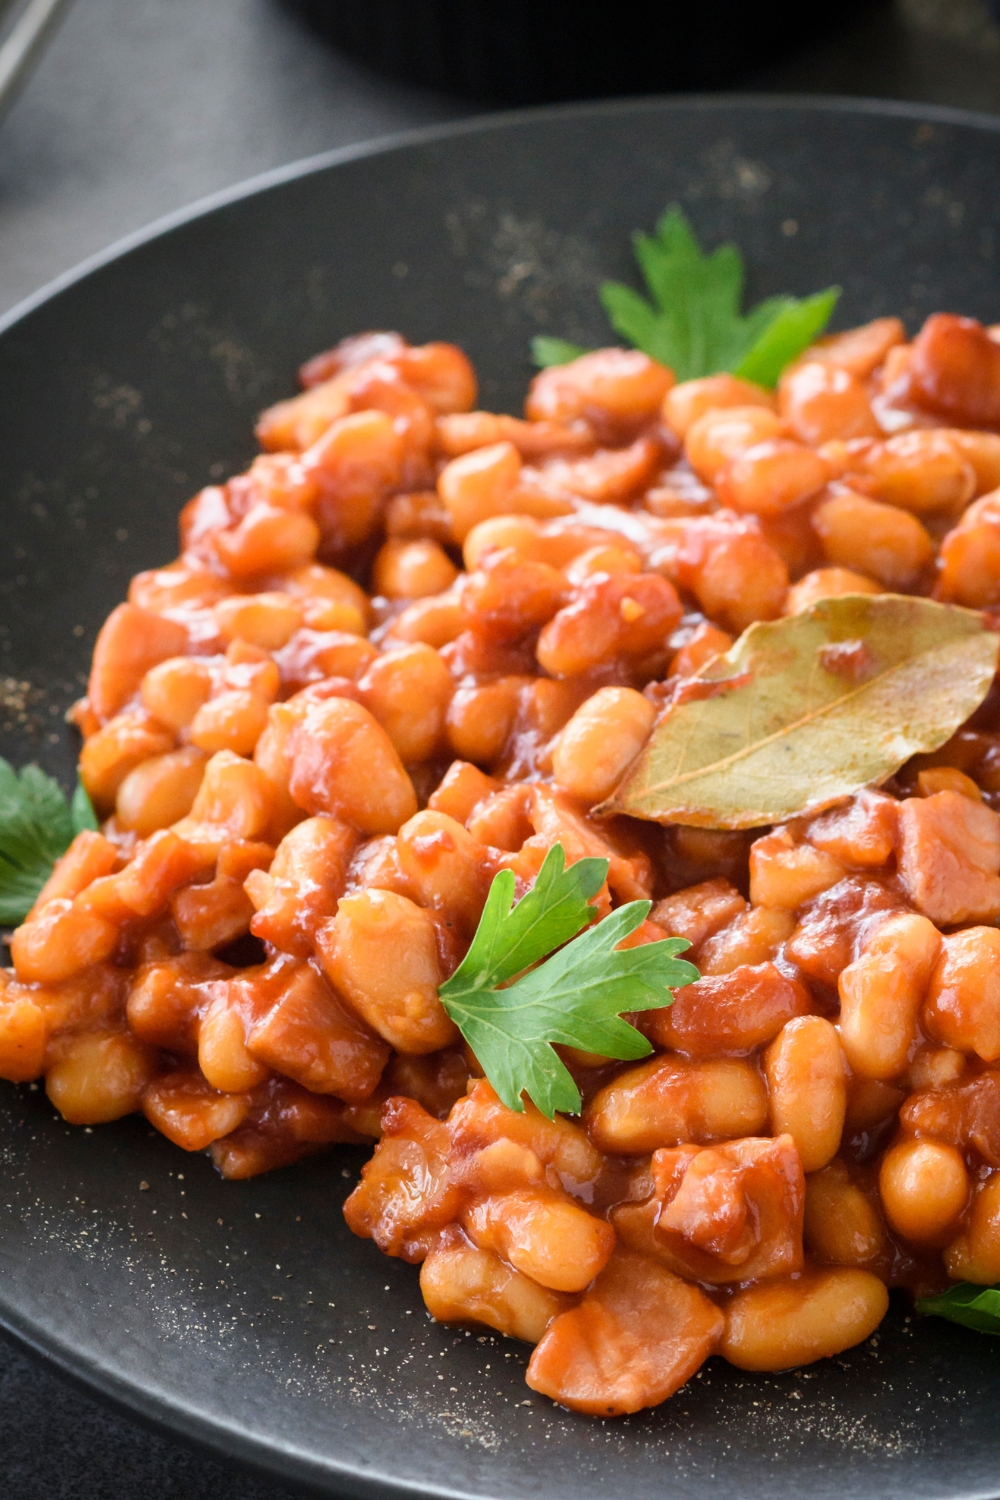 A completed dish of baked beans on a black plate with garnish greens and a bay leaf